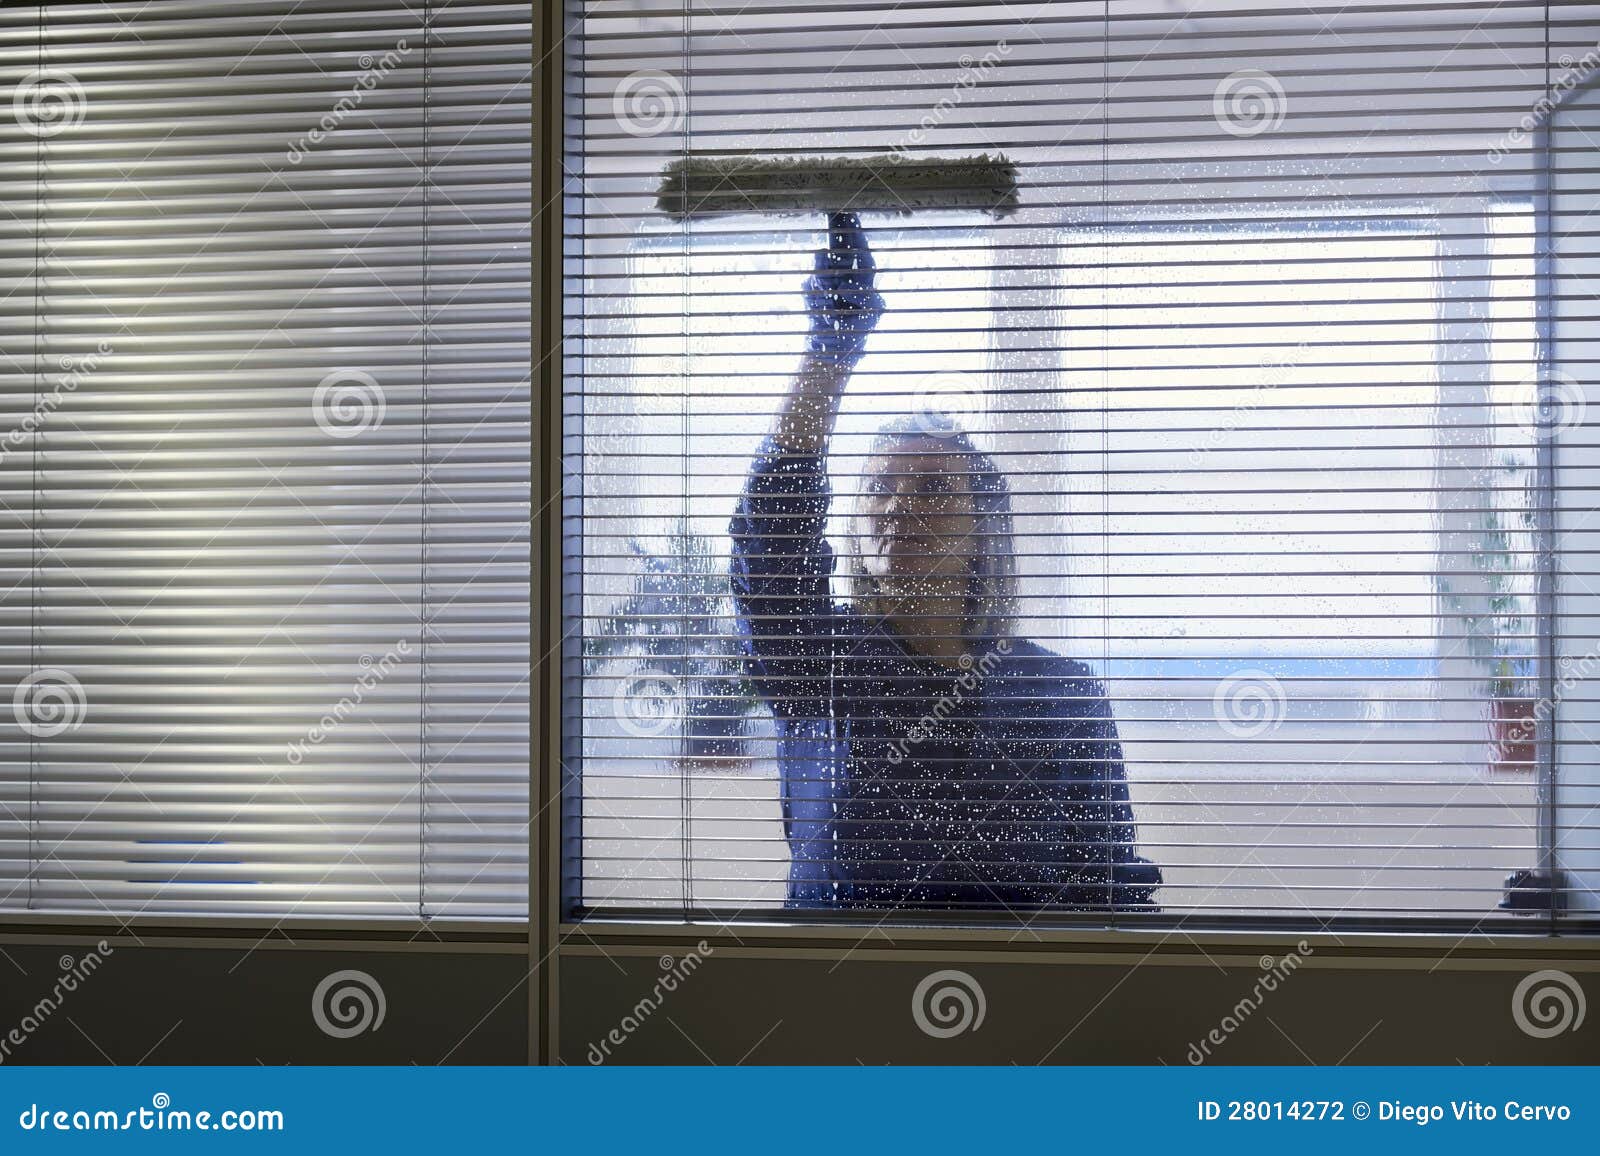 maid cleaning and wiping window in office